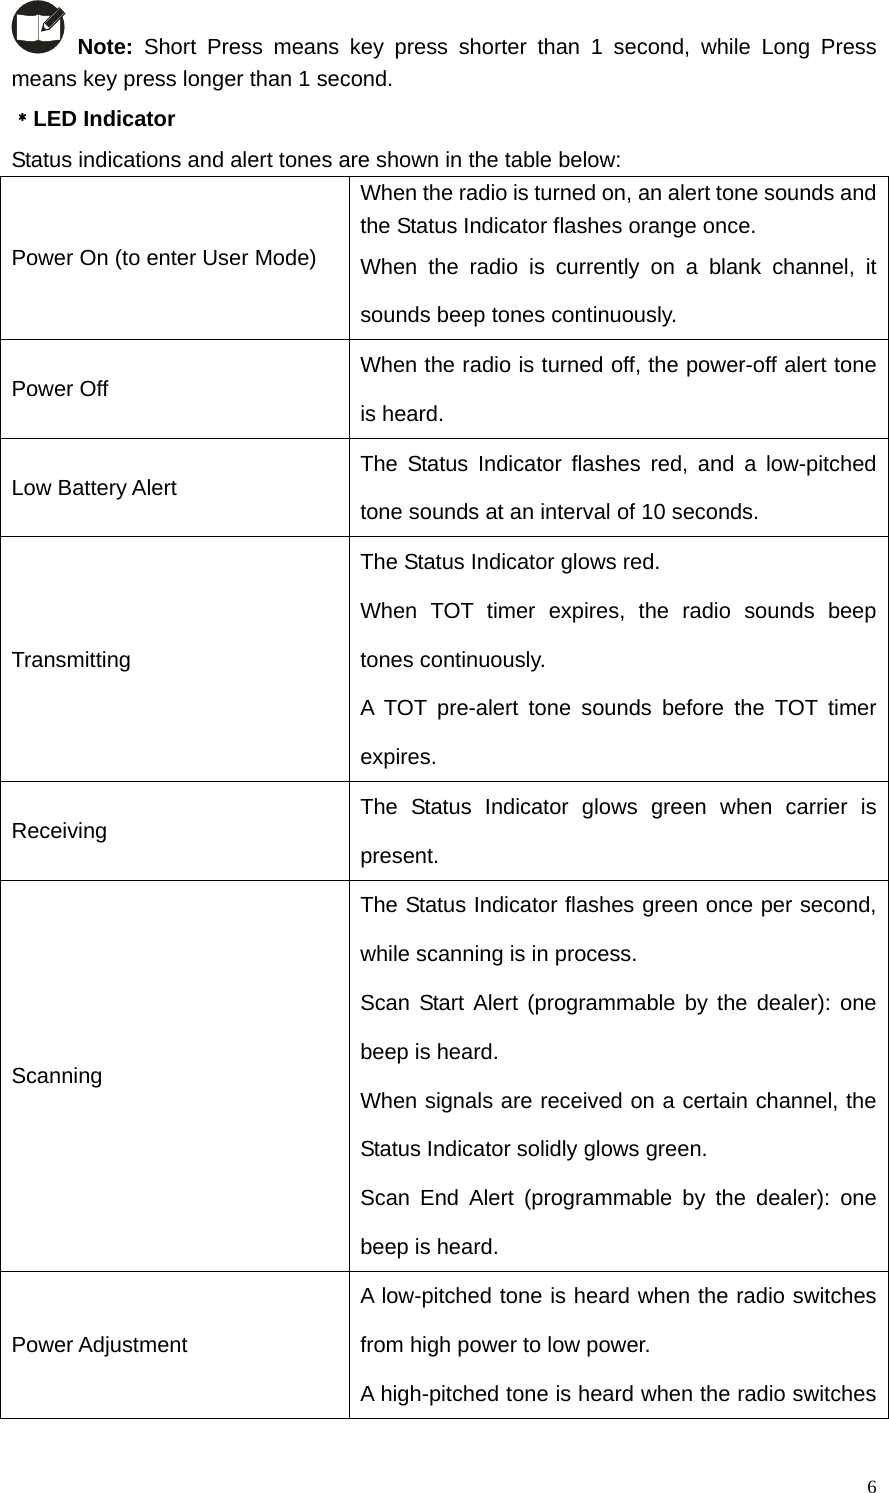   6 Note: Short Press means key press shorter than 1 second, while Long Press means key press longer than 1 second.   ﹡LED Indicator Status indications and alert tones are shown in the table below:   Power On (to enter User Mode) When the radio is turned on, an alert tone sounds and the Status Indicator flashes orange once.   When the radio is currently on a blank channel, it sounds beep tones continuously.   Power Off    When the radio is turned off, the power-off alert tone is heard.   Low Battery Alert    The Status Indicator flashes red, and a low-pitched tone sounds at an interval of 10 seconds.   Transmitting  The Status Indicator glows red.   When TOT timer expires, the radio sounds beep tones continuously.   A TOT pre-alert tone sounds before the TOT timer expires.  Receiving   The Status Indicator glows green when carrier is present.  Scanning  The Status Indicator flashes green once per second, while scanning is in process.   Scan Start Alert (programmable by the dealer): one beep is heard.   When signals are received on a certain channel, the Status Indicator solidly glows green.   Scan End Alert (programmable by the dealer): one beep is heard.   Power Adjustment   A low-pitched tone is heard when the radio switches from high power to low power.   A high-pitched tone is heard when the radio switches 